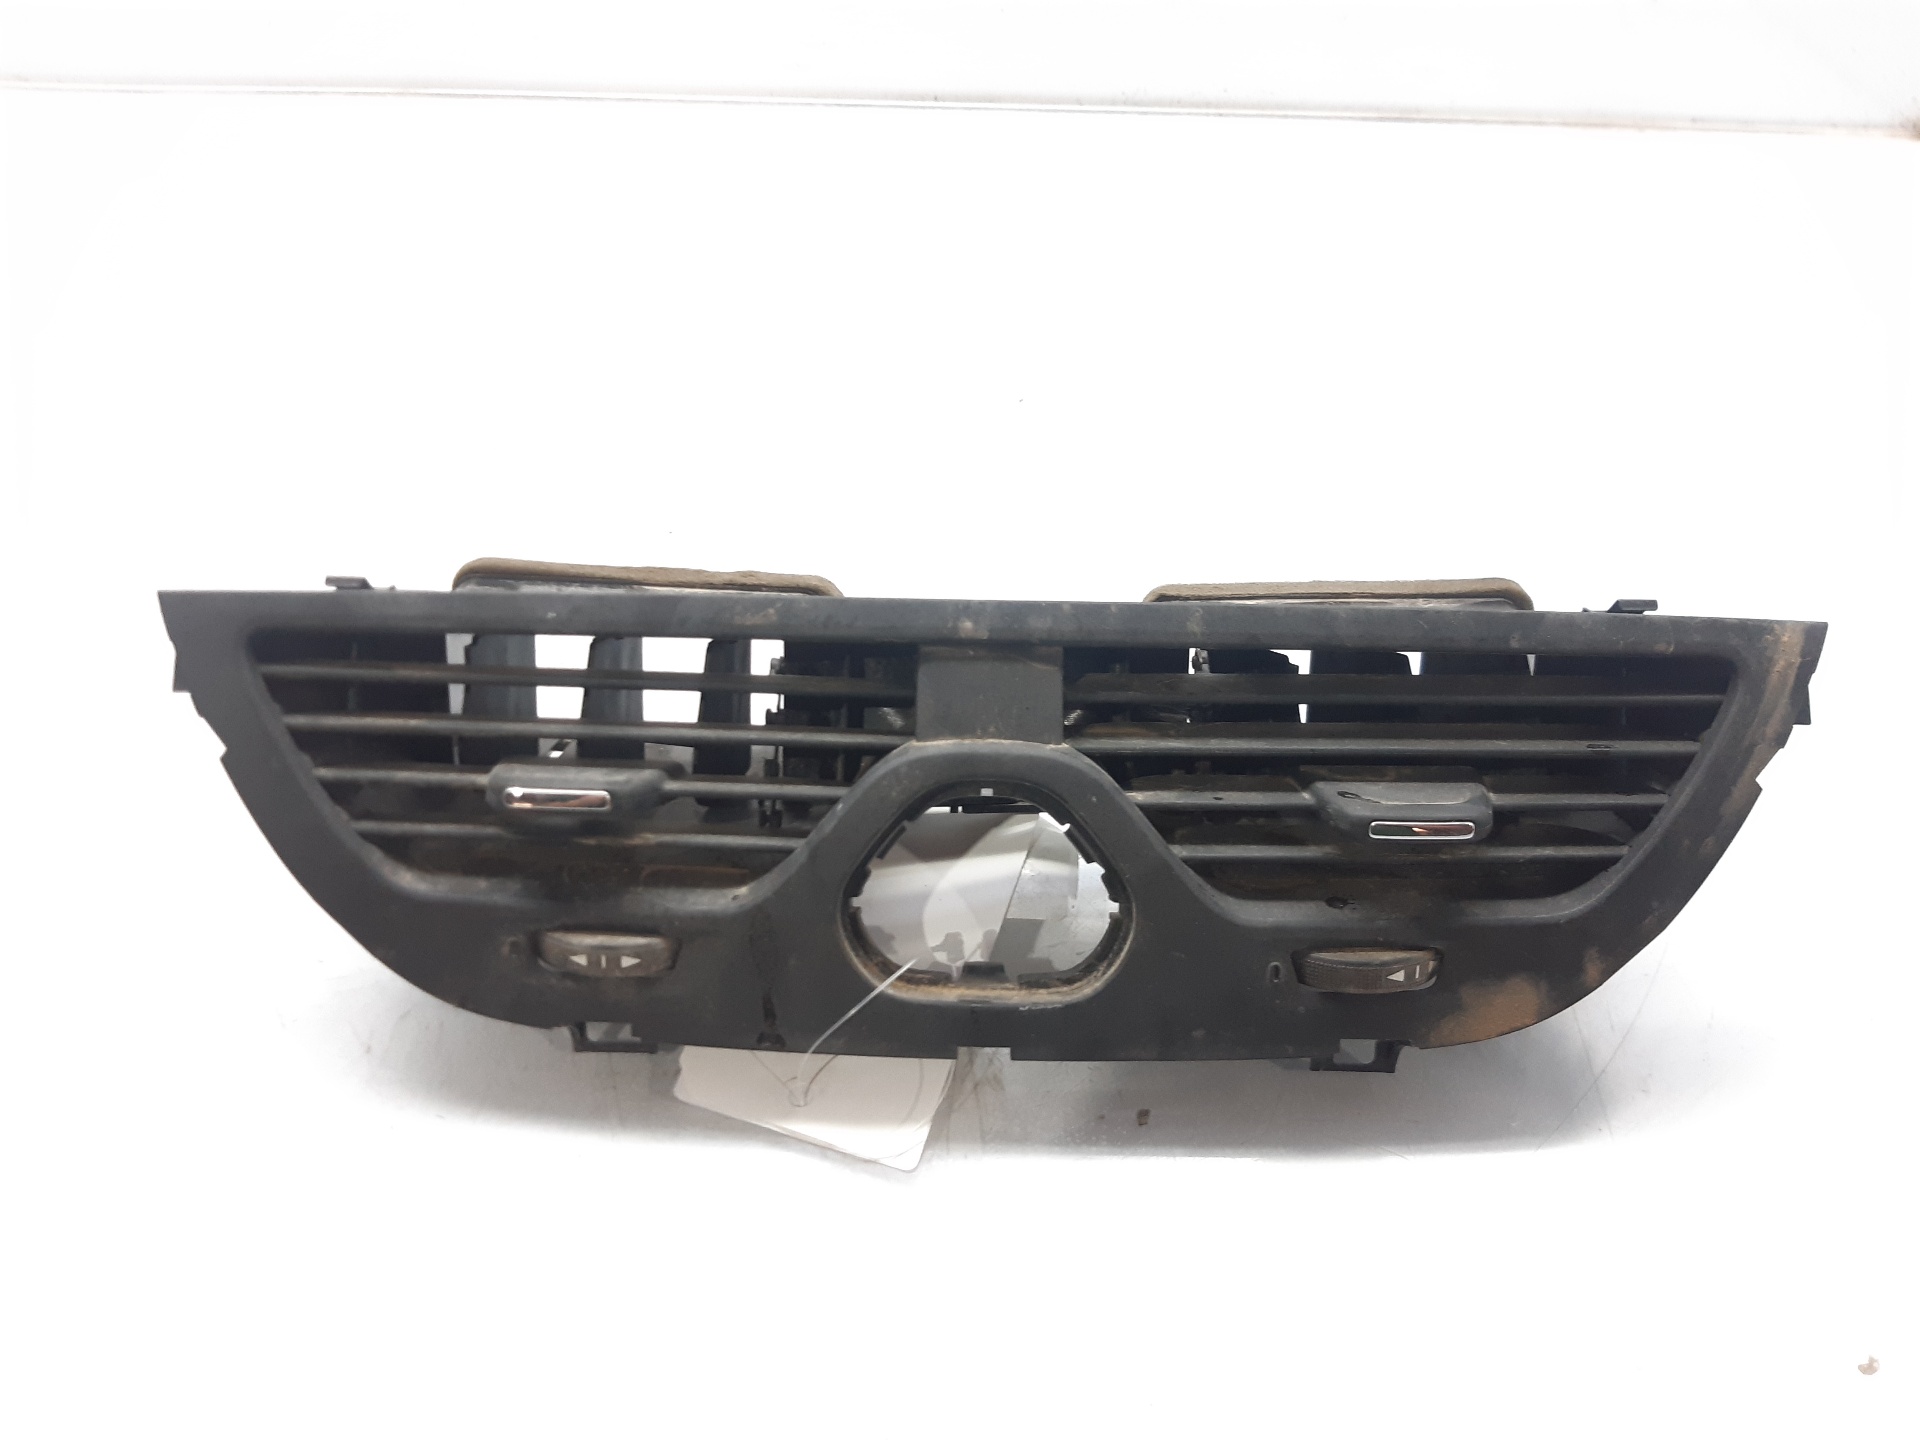 OPEL Corsa D (2006-2020) Cabin Air Intake Grille 13377949 24028974